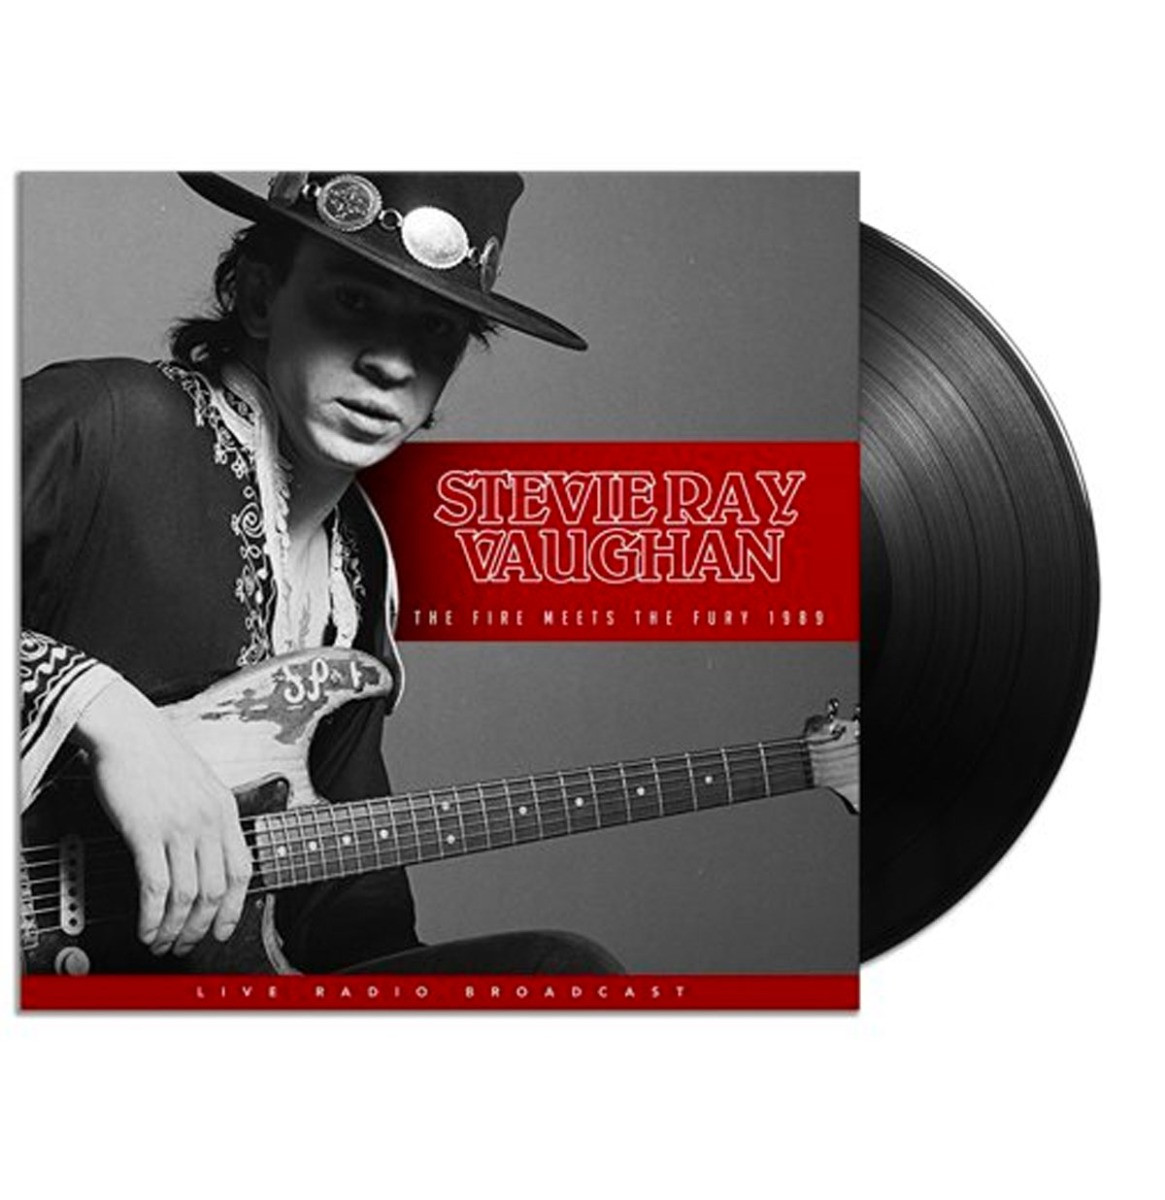 Stevie Ray Vaughan - The Fire Meets The Fury 1989 LP